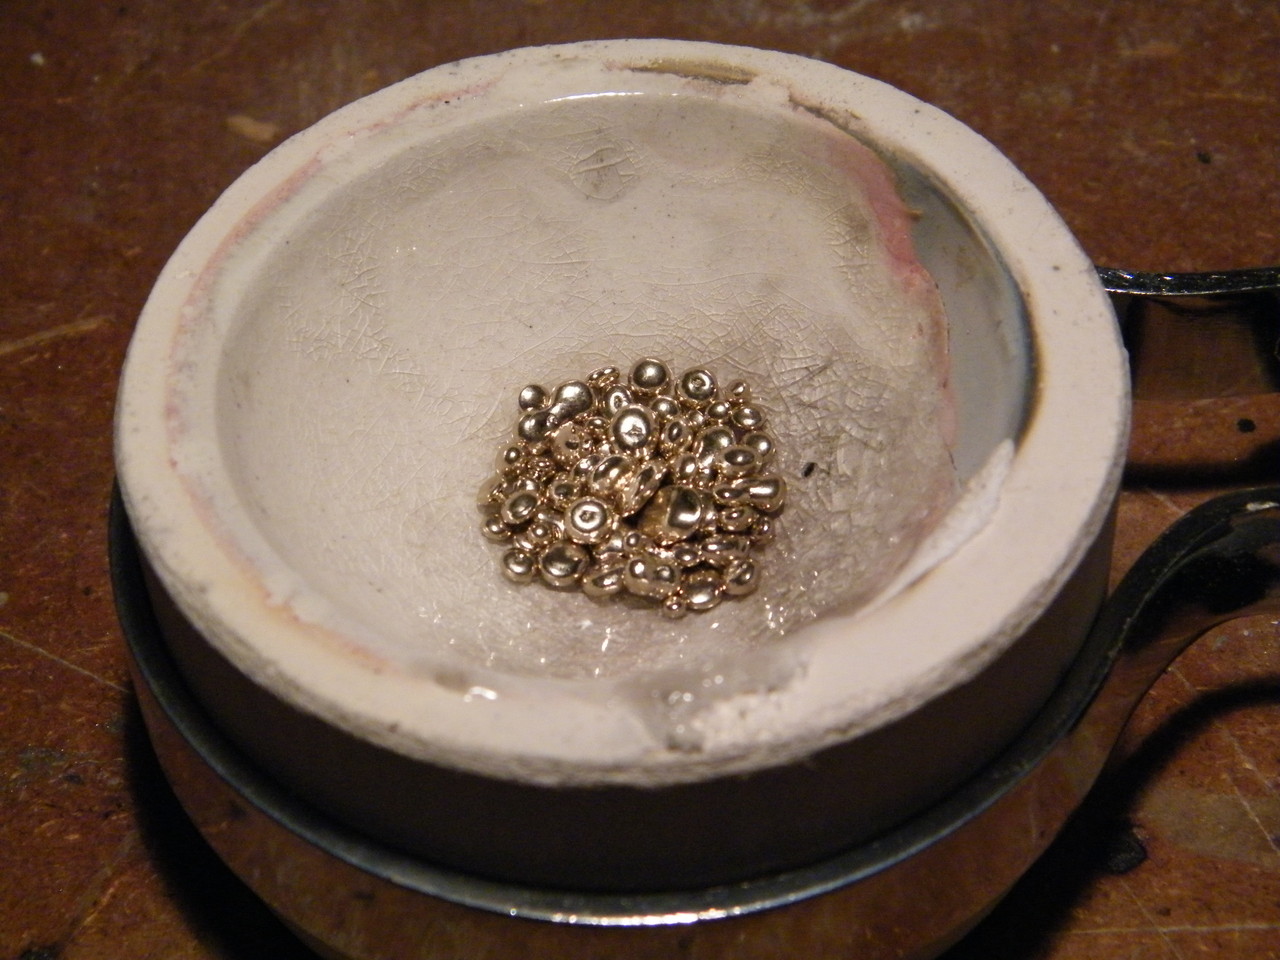 Meanwhile, the casting grain is ready for melting.  Here we have 14K white gold in the crucible.